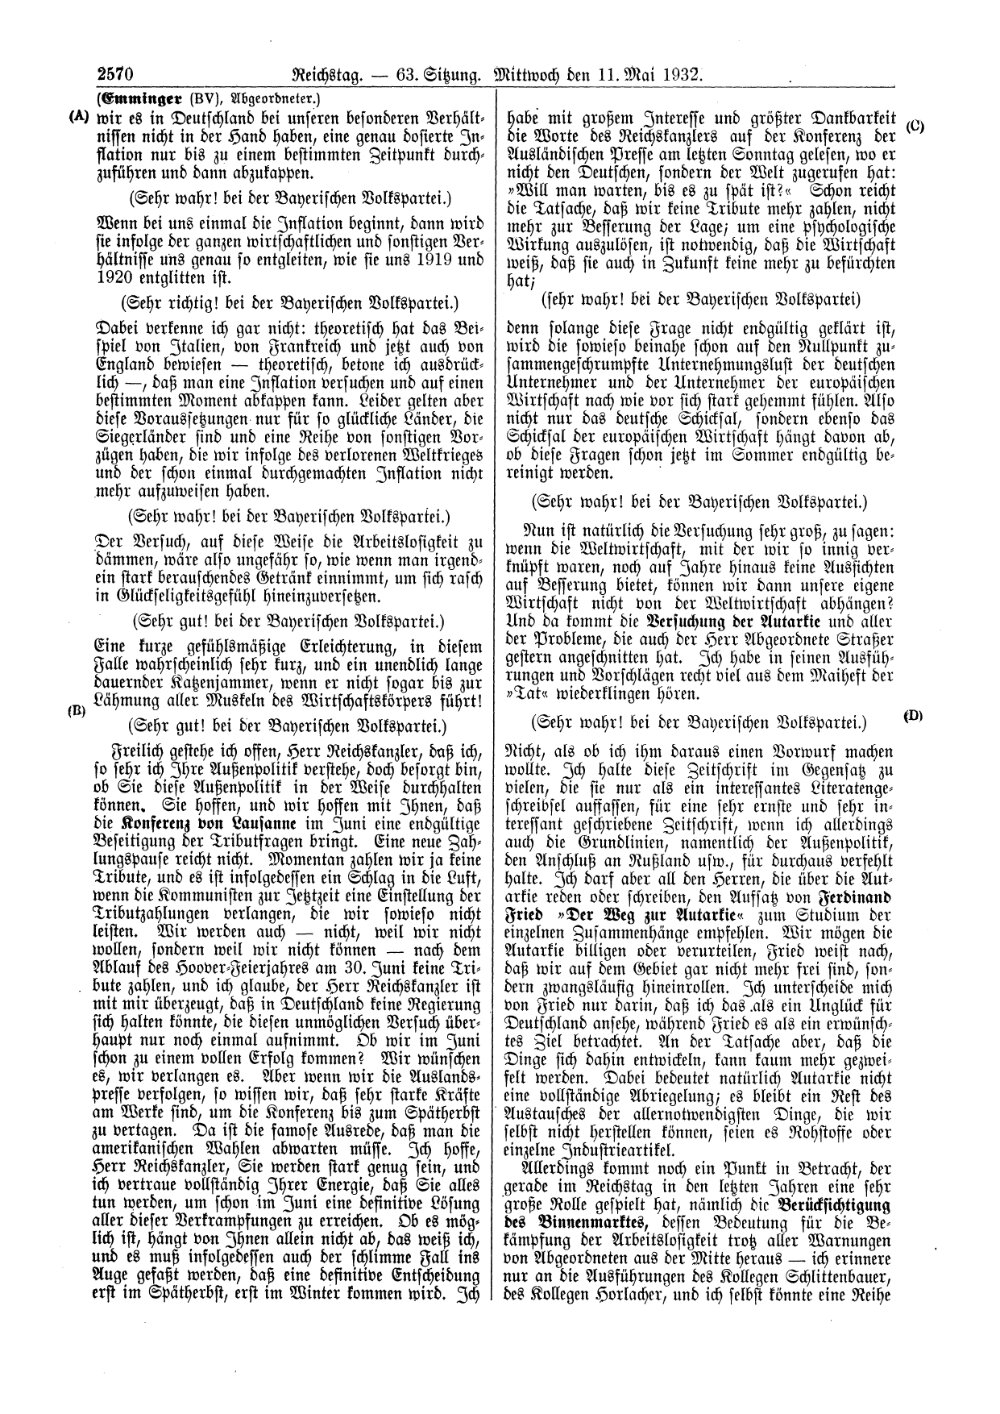 Scan of page 2570